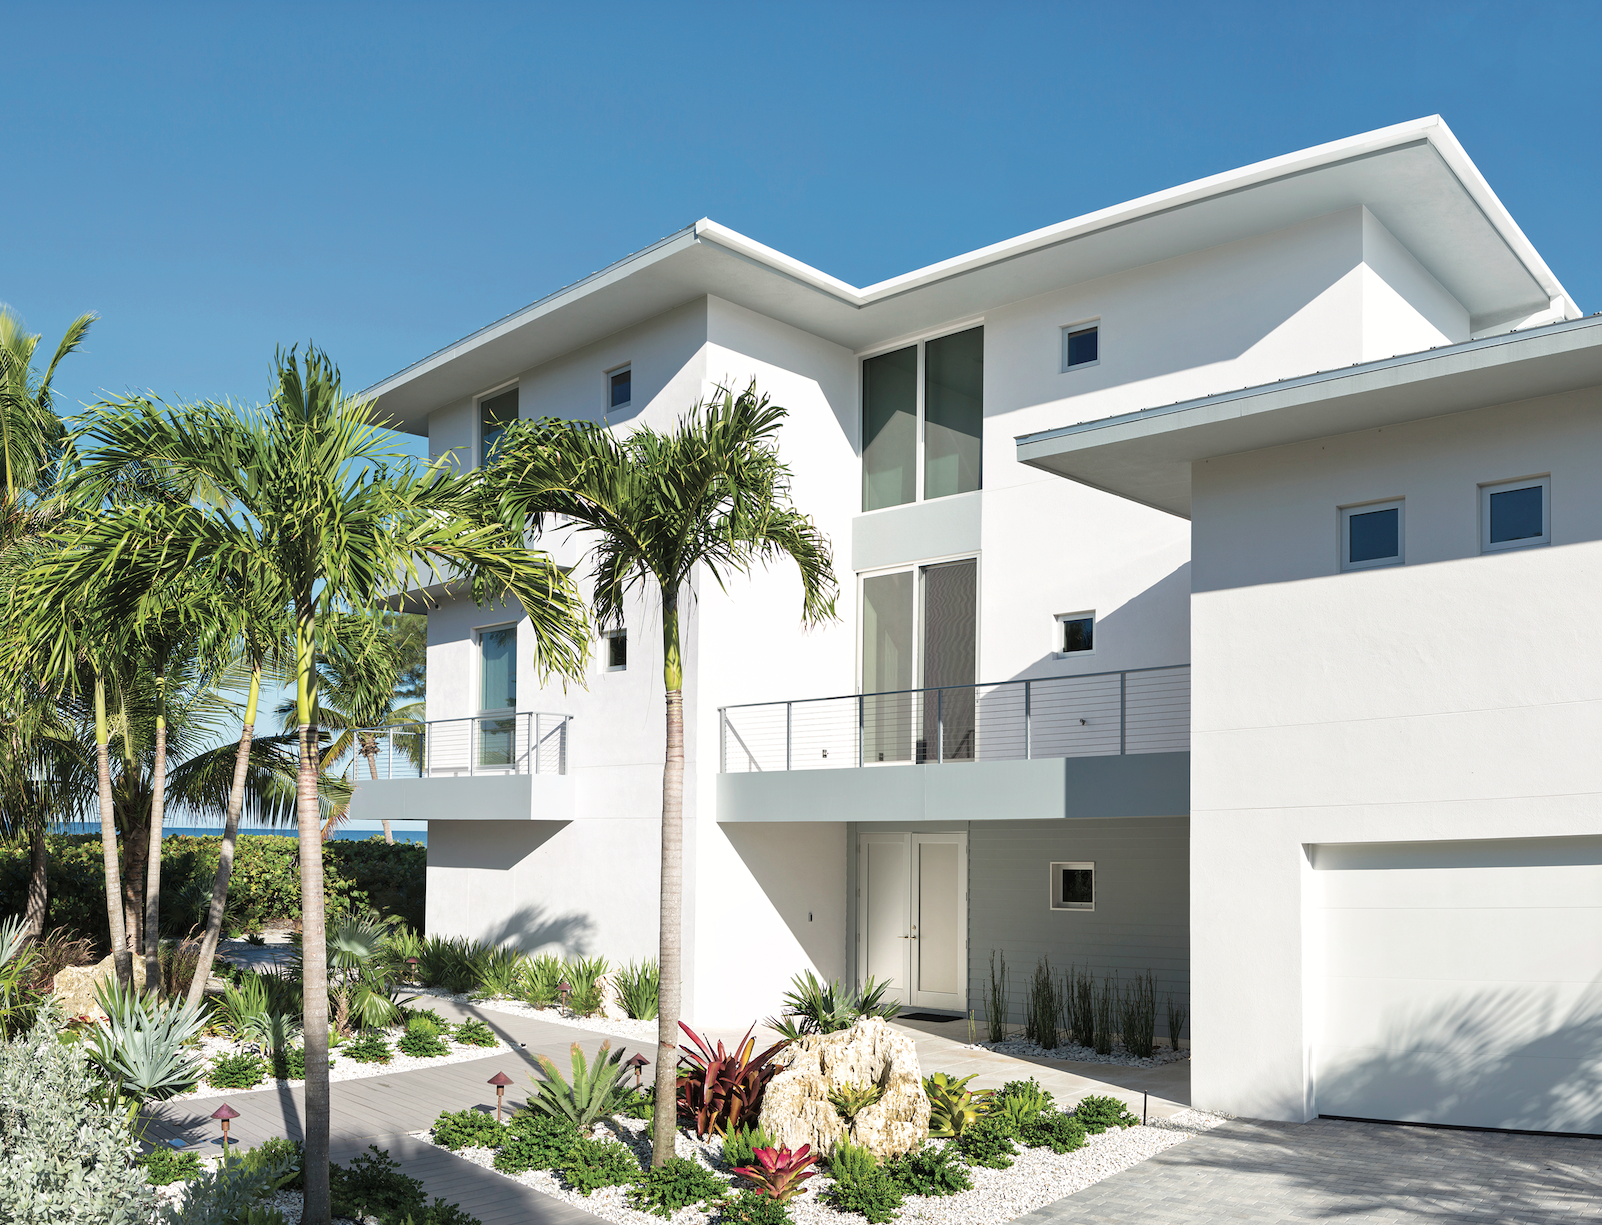 Gulfshore Homes specializes in modern architecture